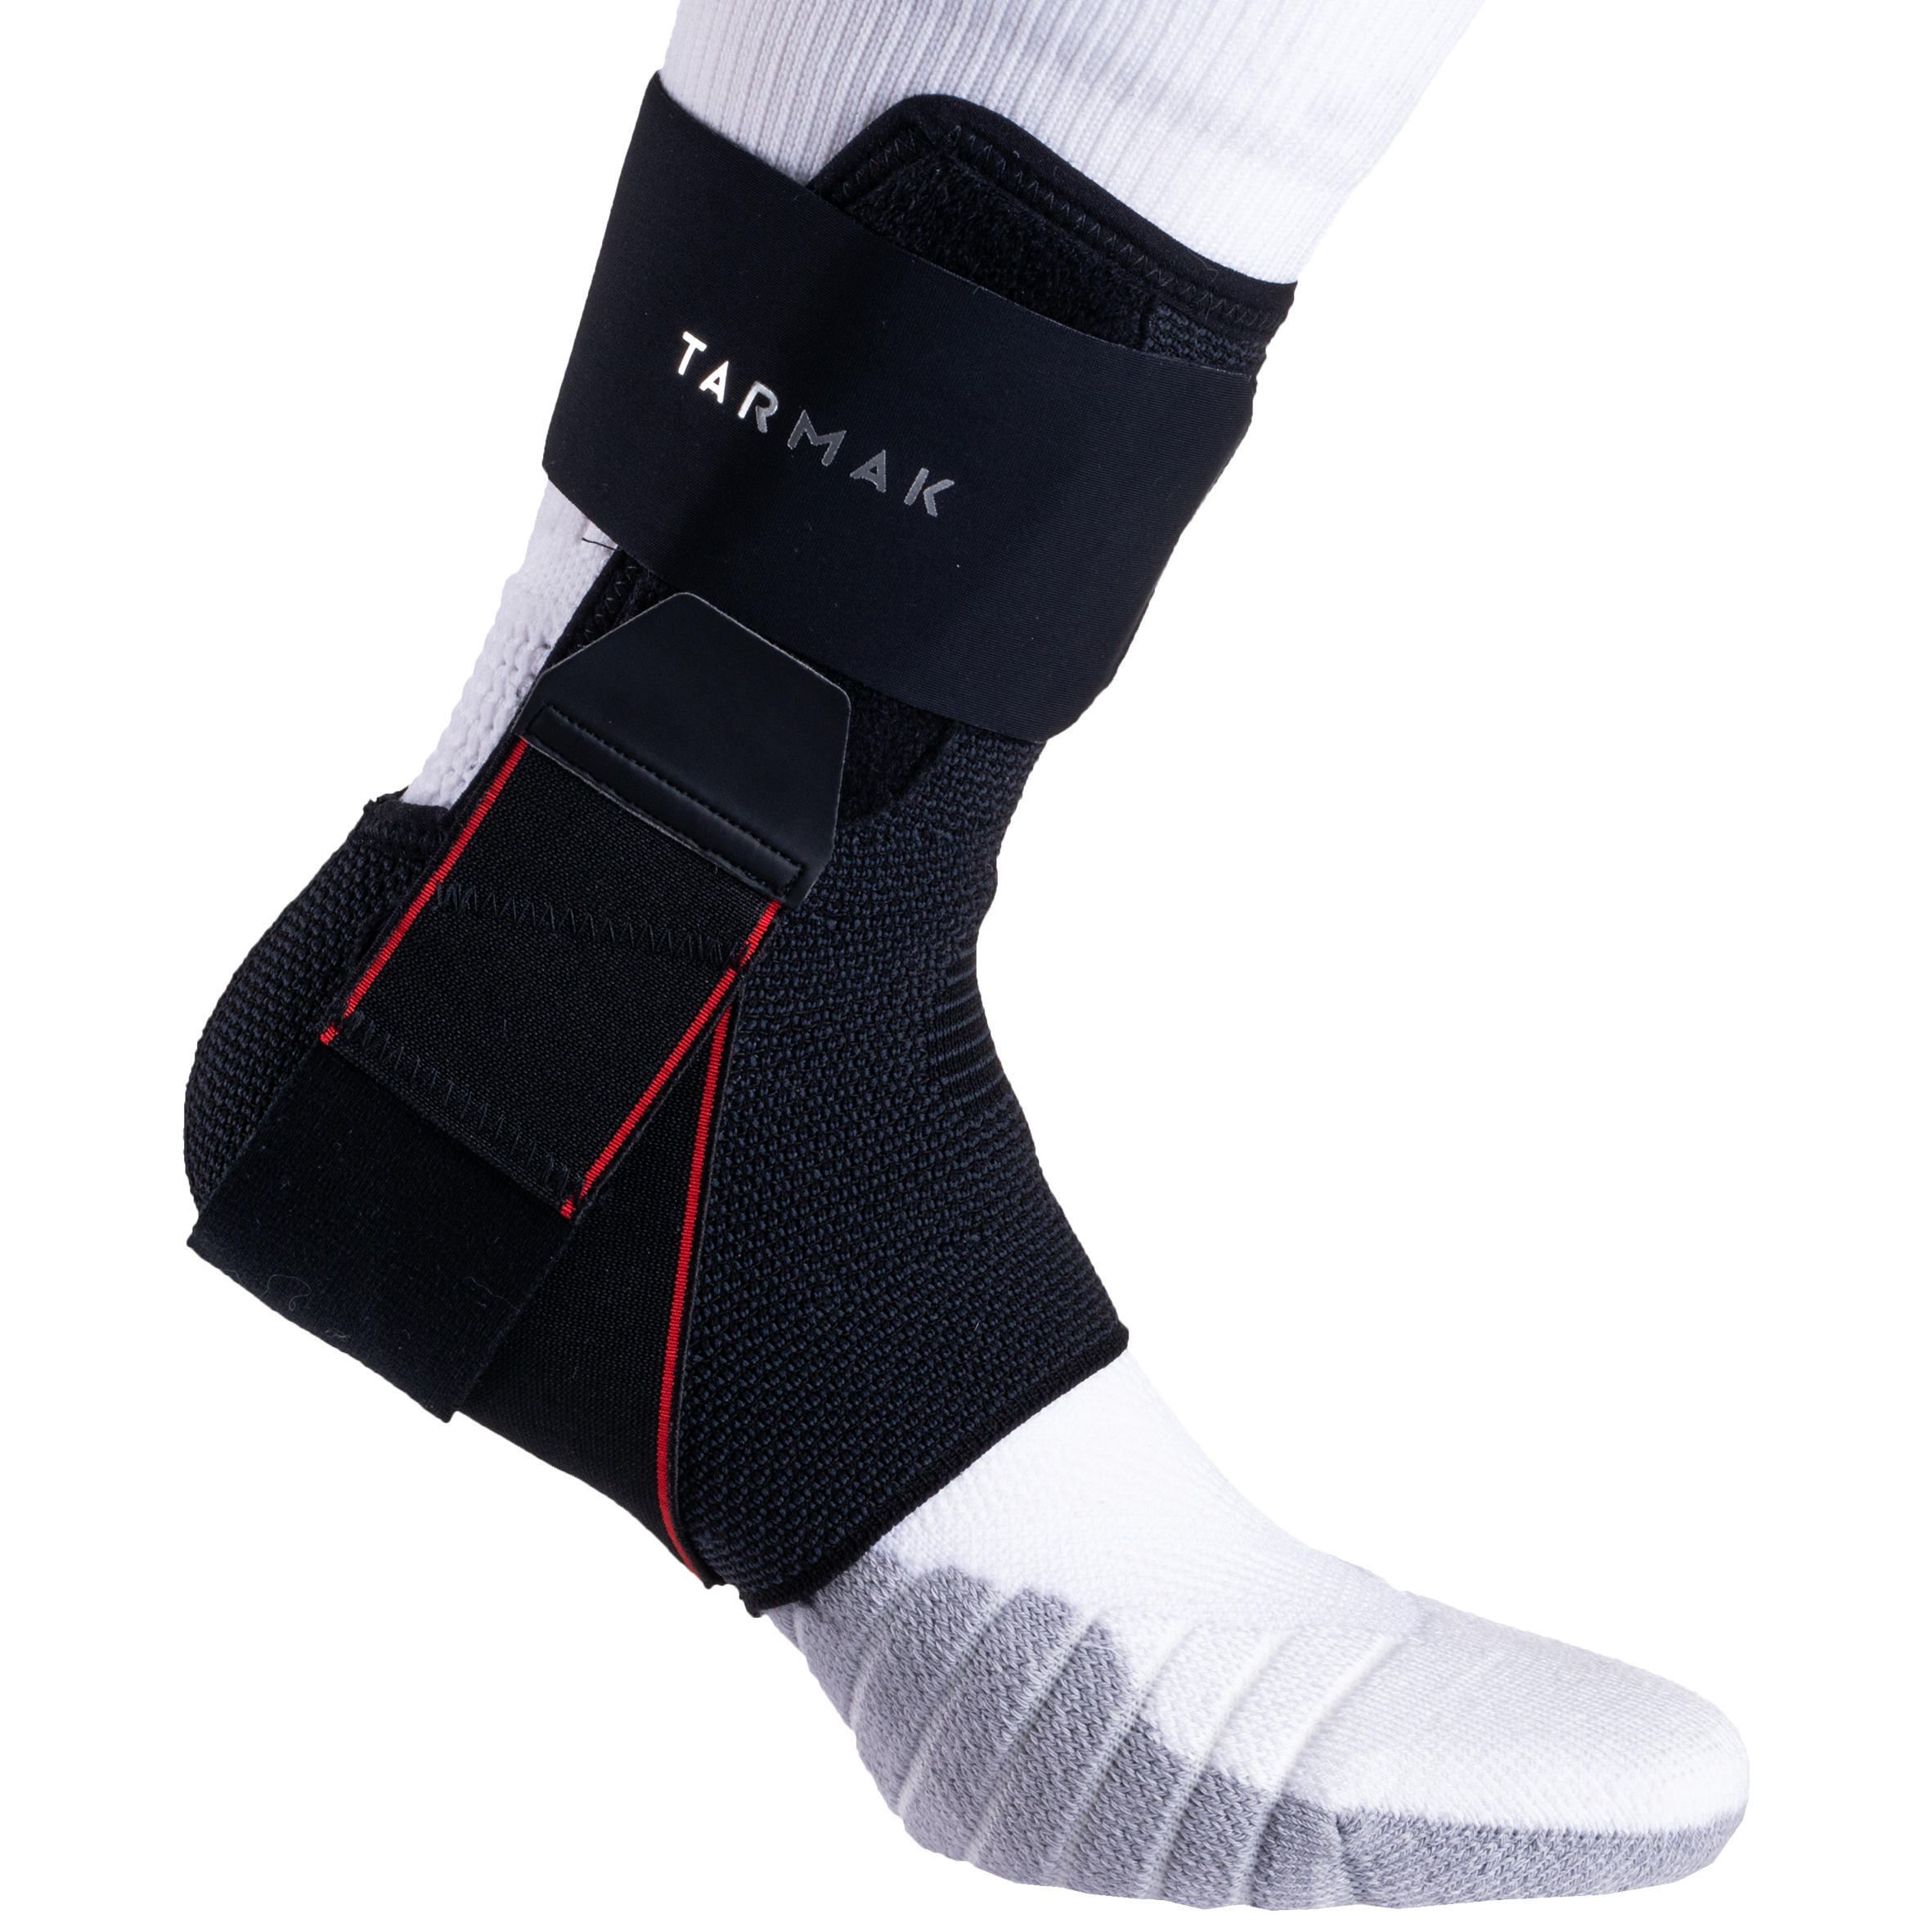 Strong 500 Men's/Women's Right/Left Ankle Ligament Support - Black 5/7